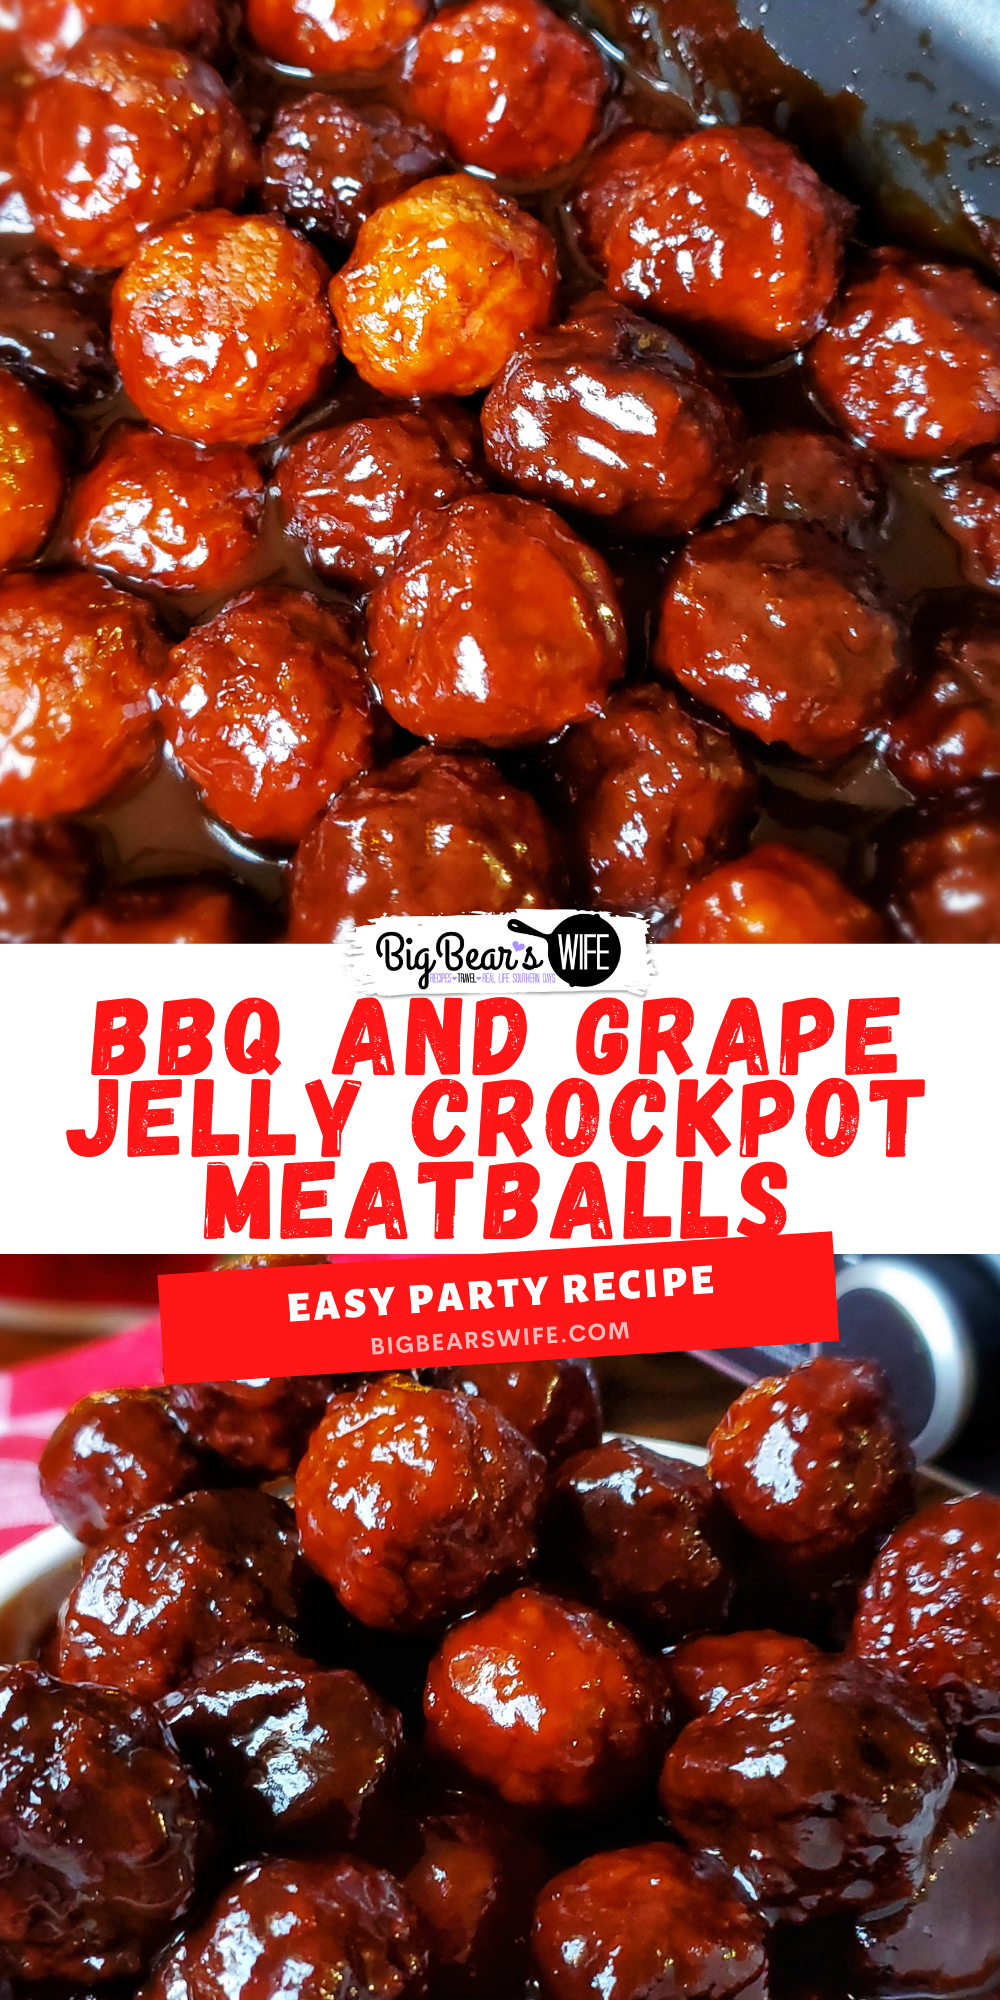 These super popular BBQ and Grape Jelly Crockpot Meatballs are always a hit at Thanksgiving at Christmas! They're super easy to make and everyone always loves them! I had no idea how easy they were until my mom showed me how to make them!  via @bigbearswife